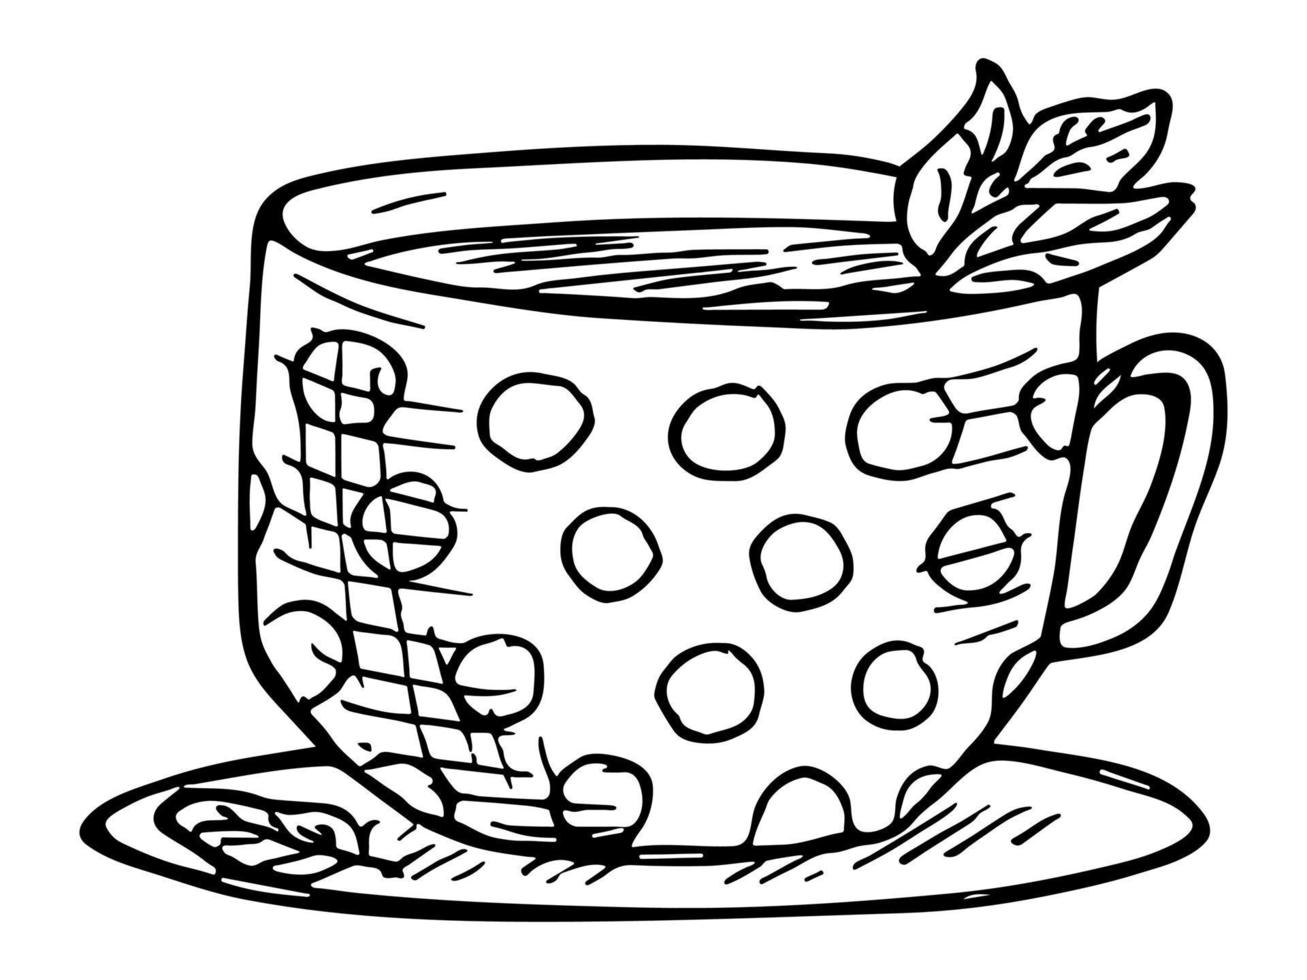 Cute cup of tea or coffee illustration. Simple mug clipart. Cozy home doodle vector